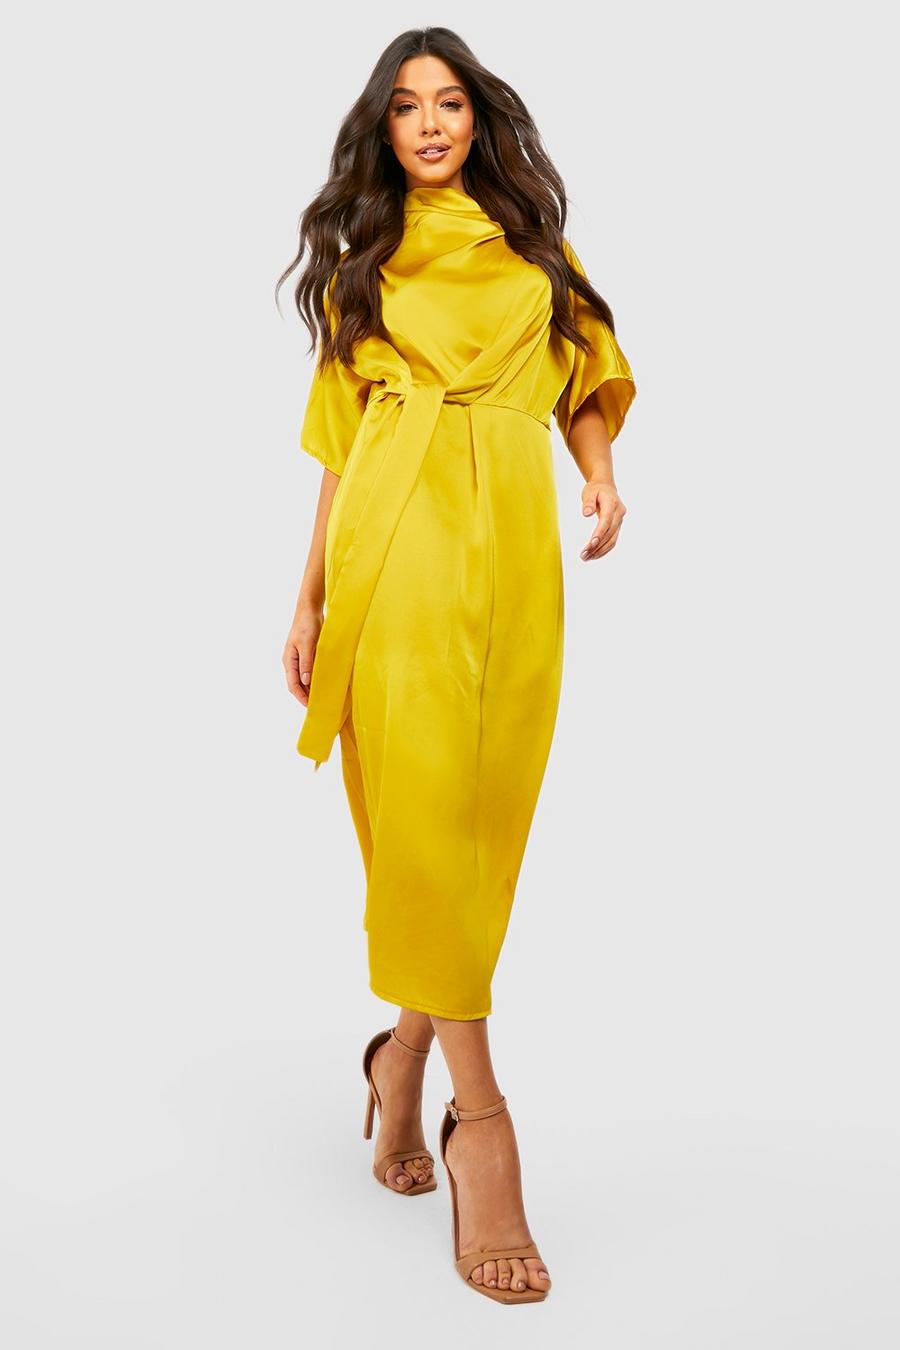 Ochre yellow Satin Tie Front Cowl Neck Midi Dress image number 1